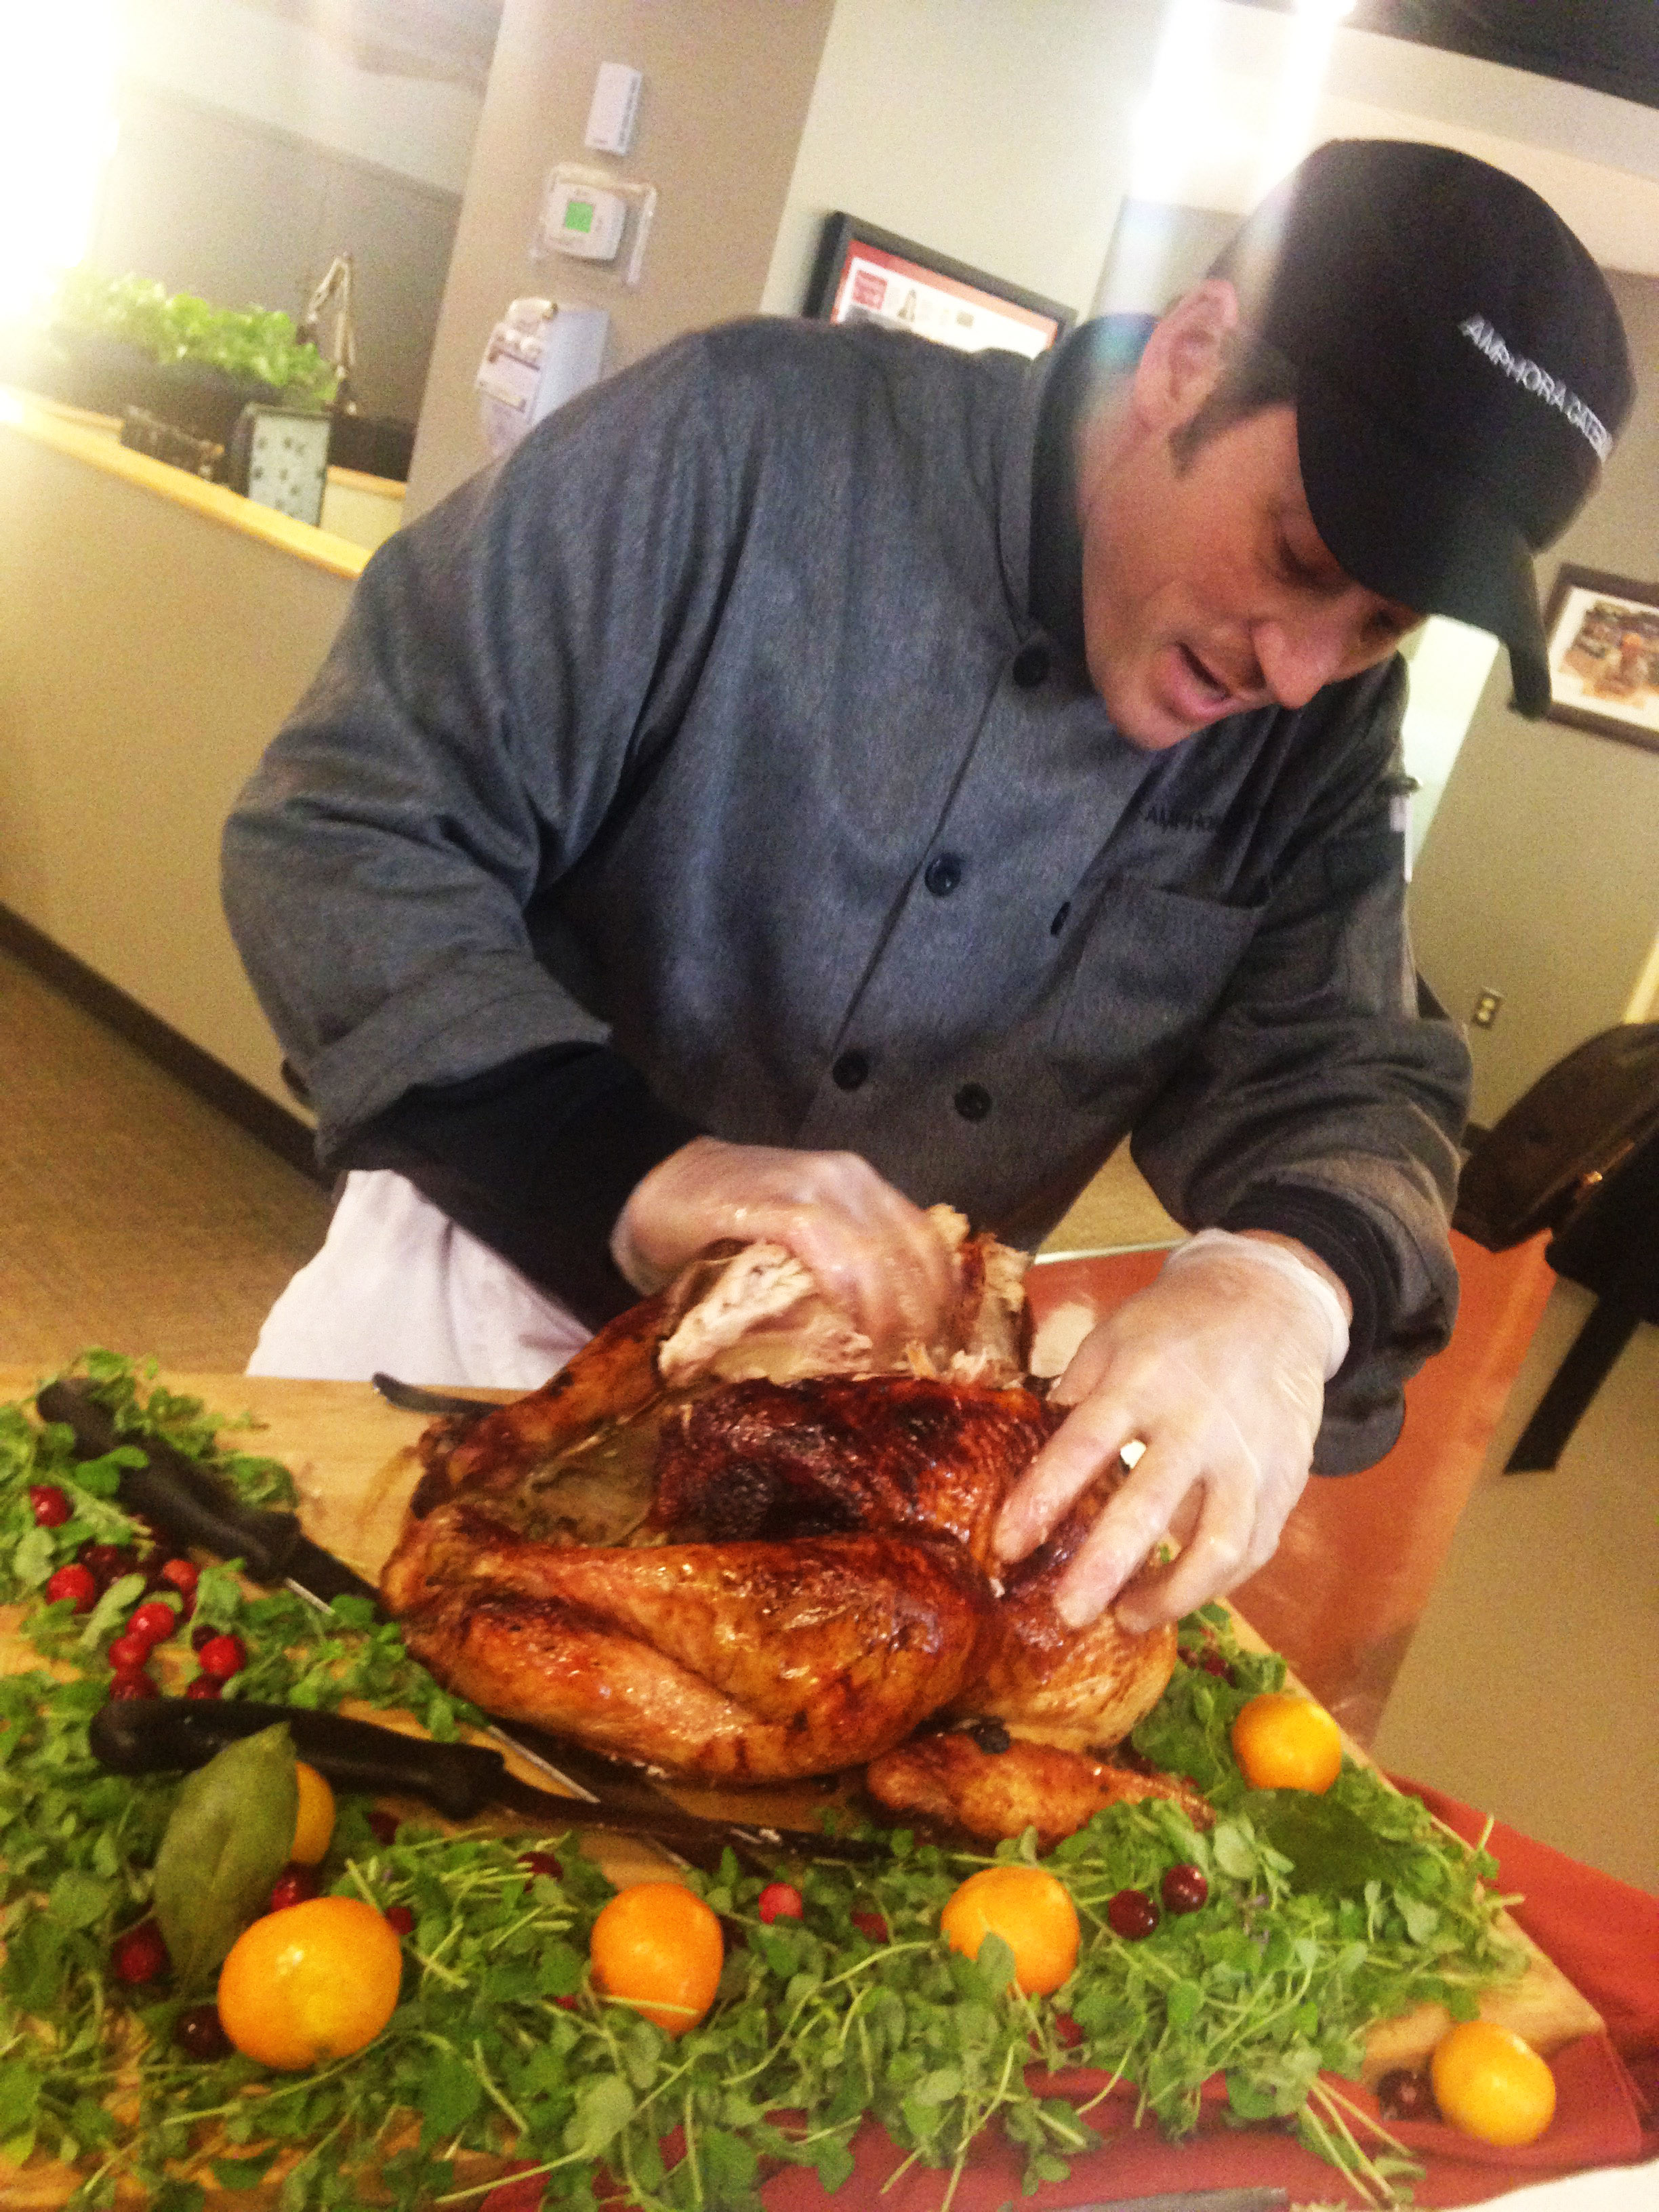 Local chef offers turkey-carving tips (Video)